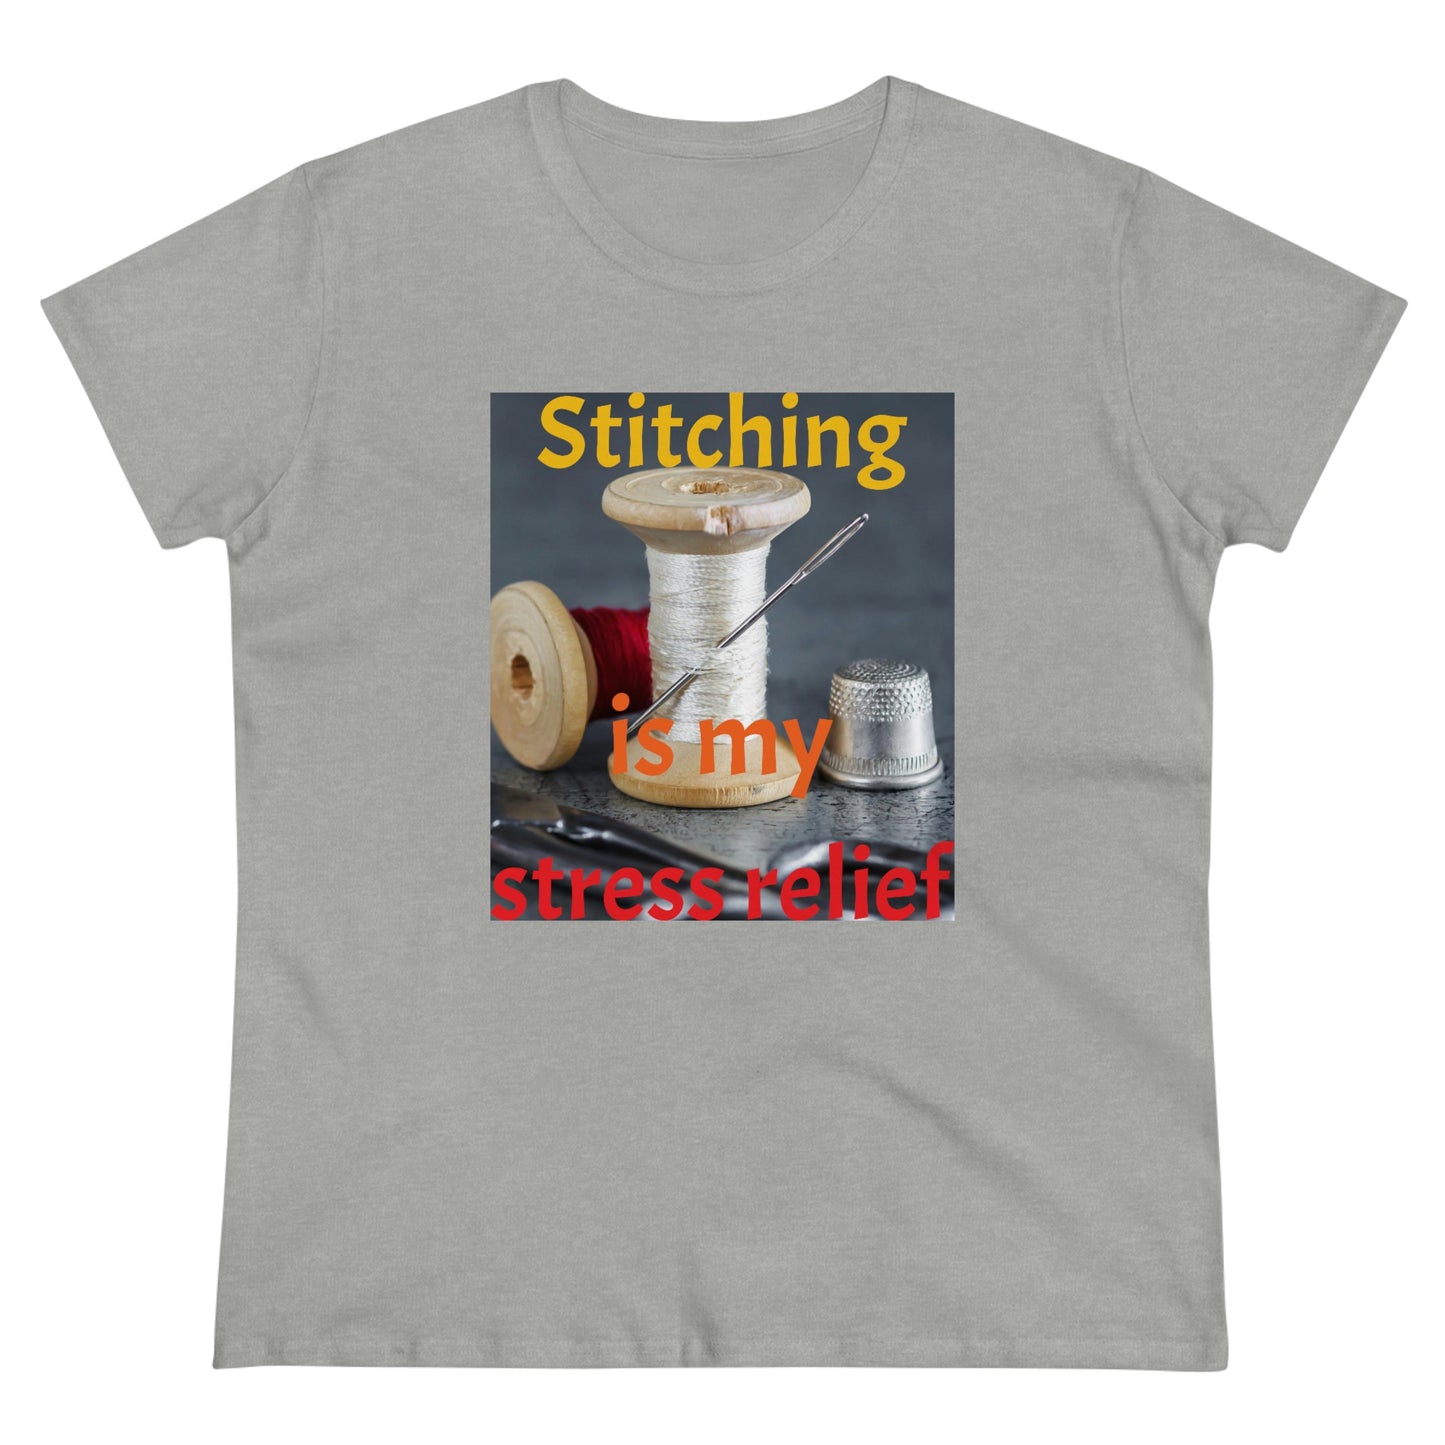 Stress Relief Midweight Cotton Tee